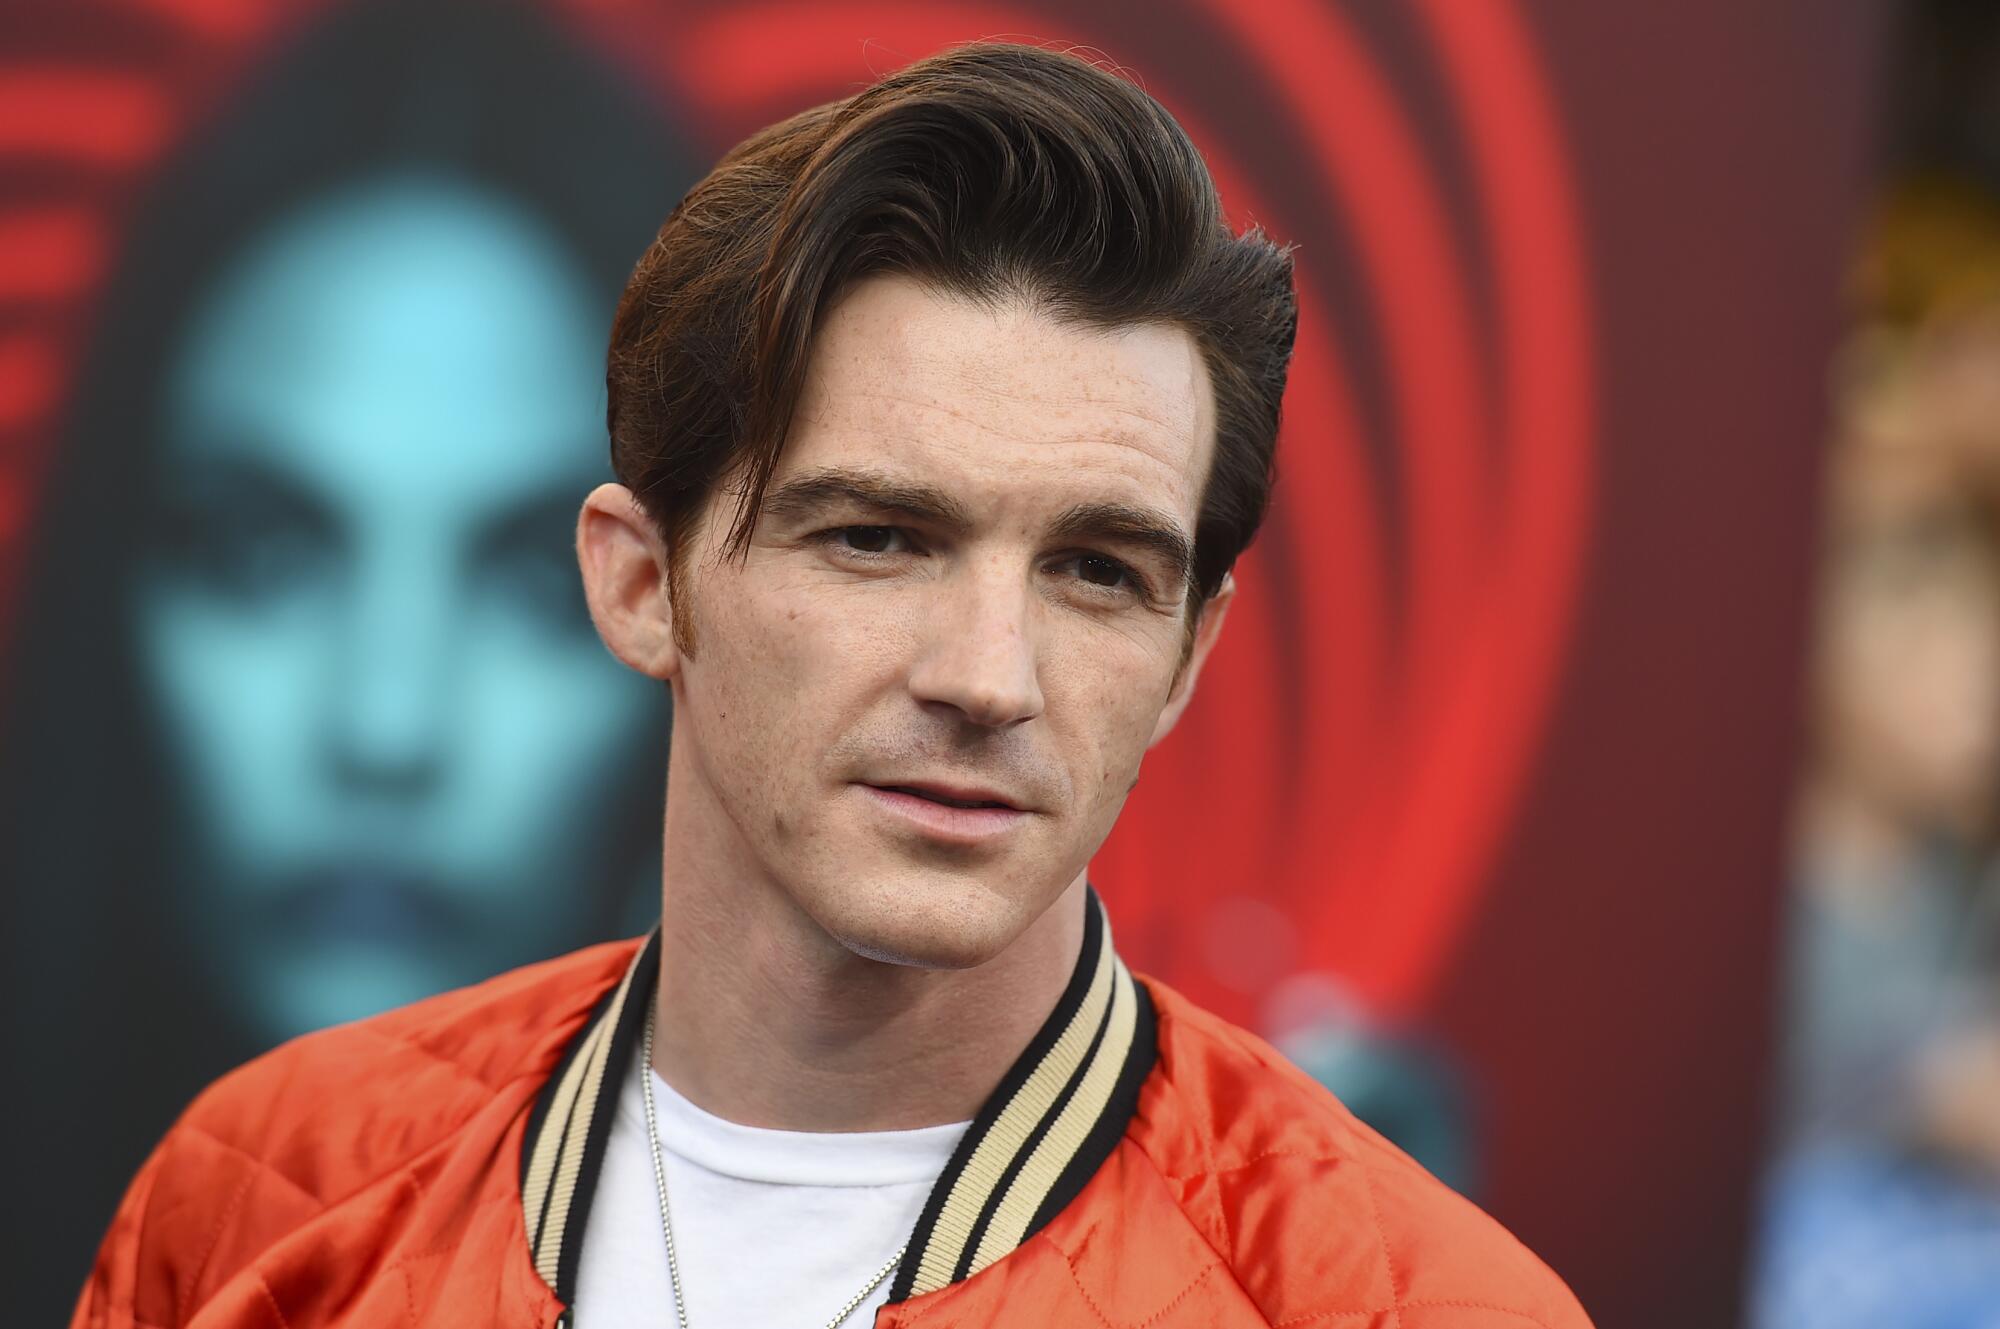 Drake Bell posing at an angle wearing a red jacket and a white T-shirt.